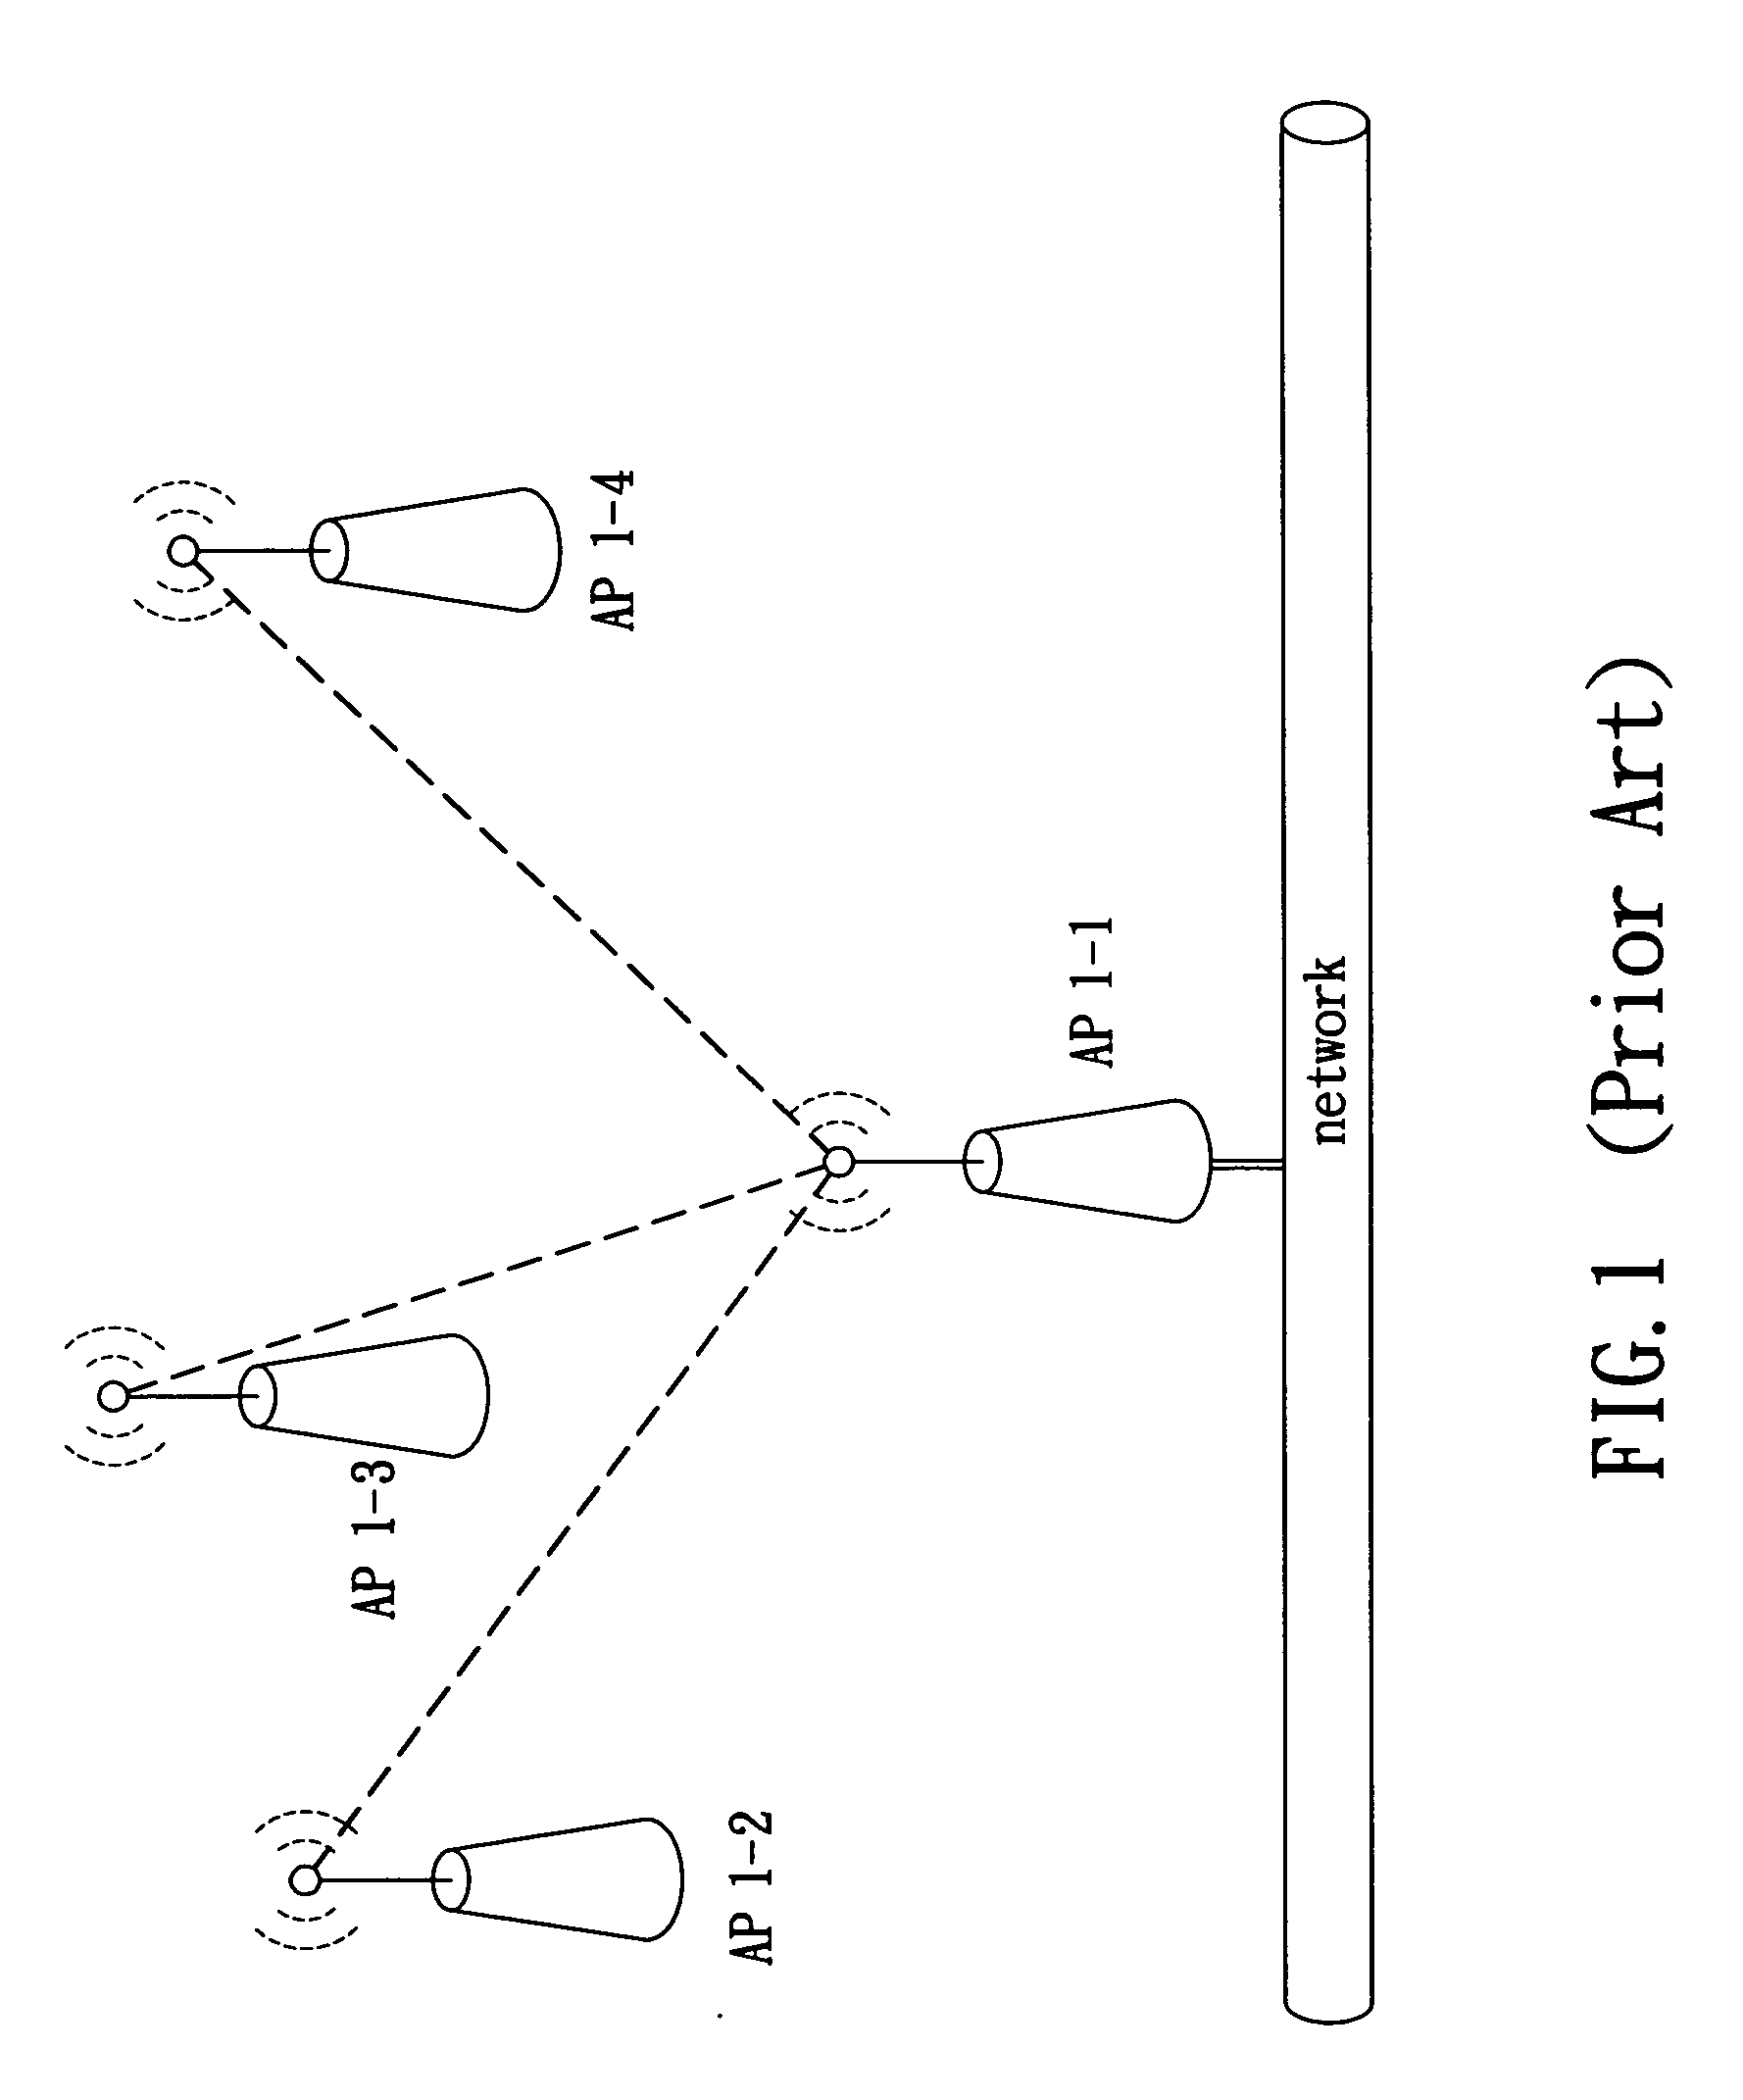 Dynamic wireless meshing network for supporting load balance and flow control